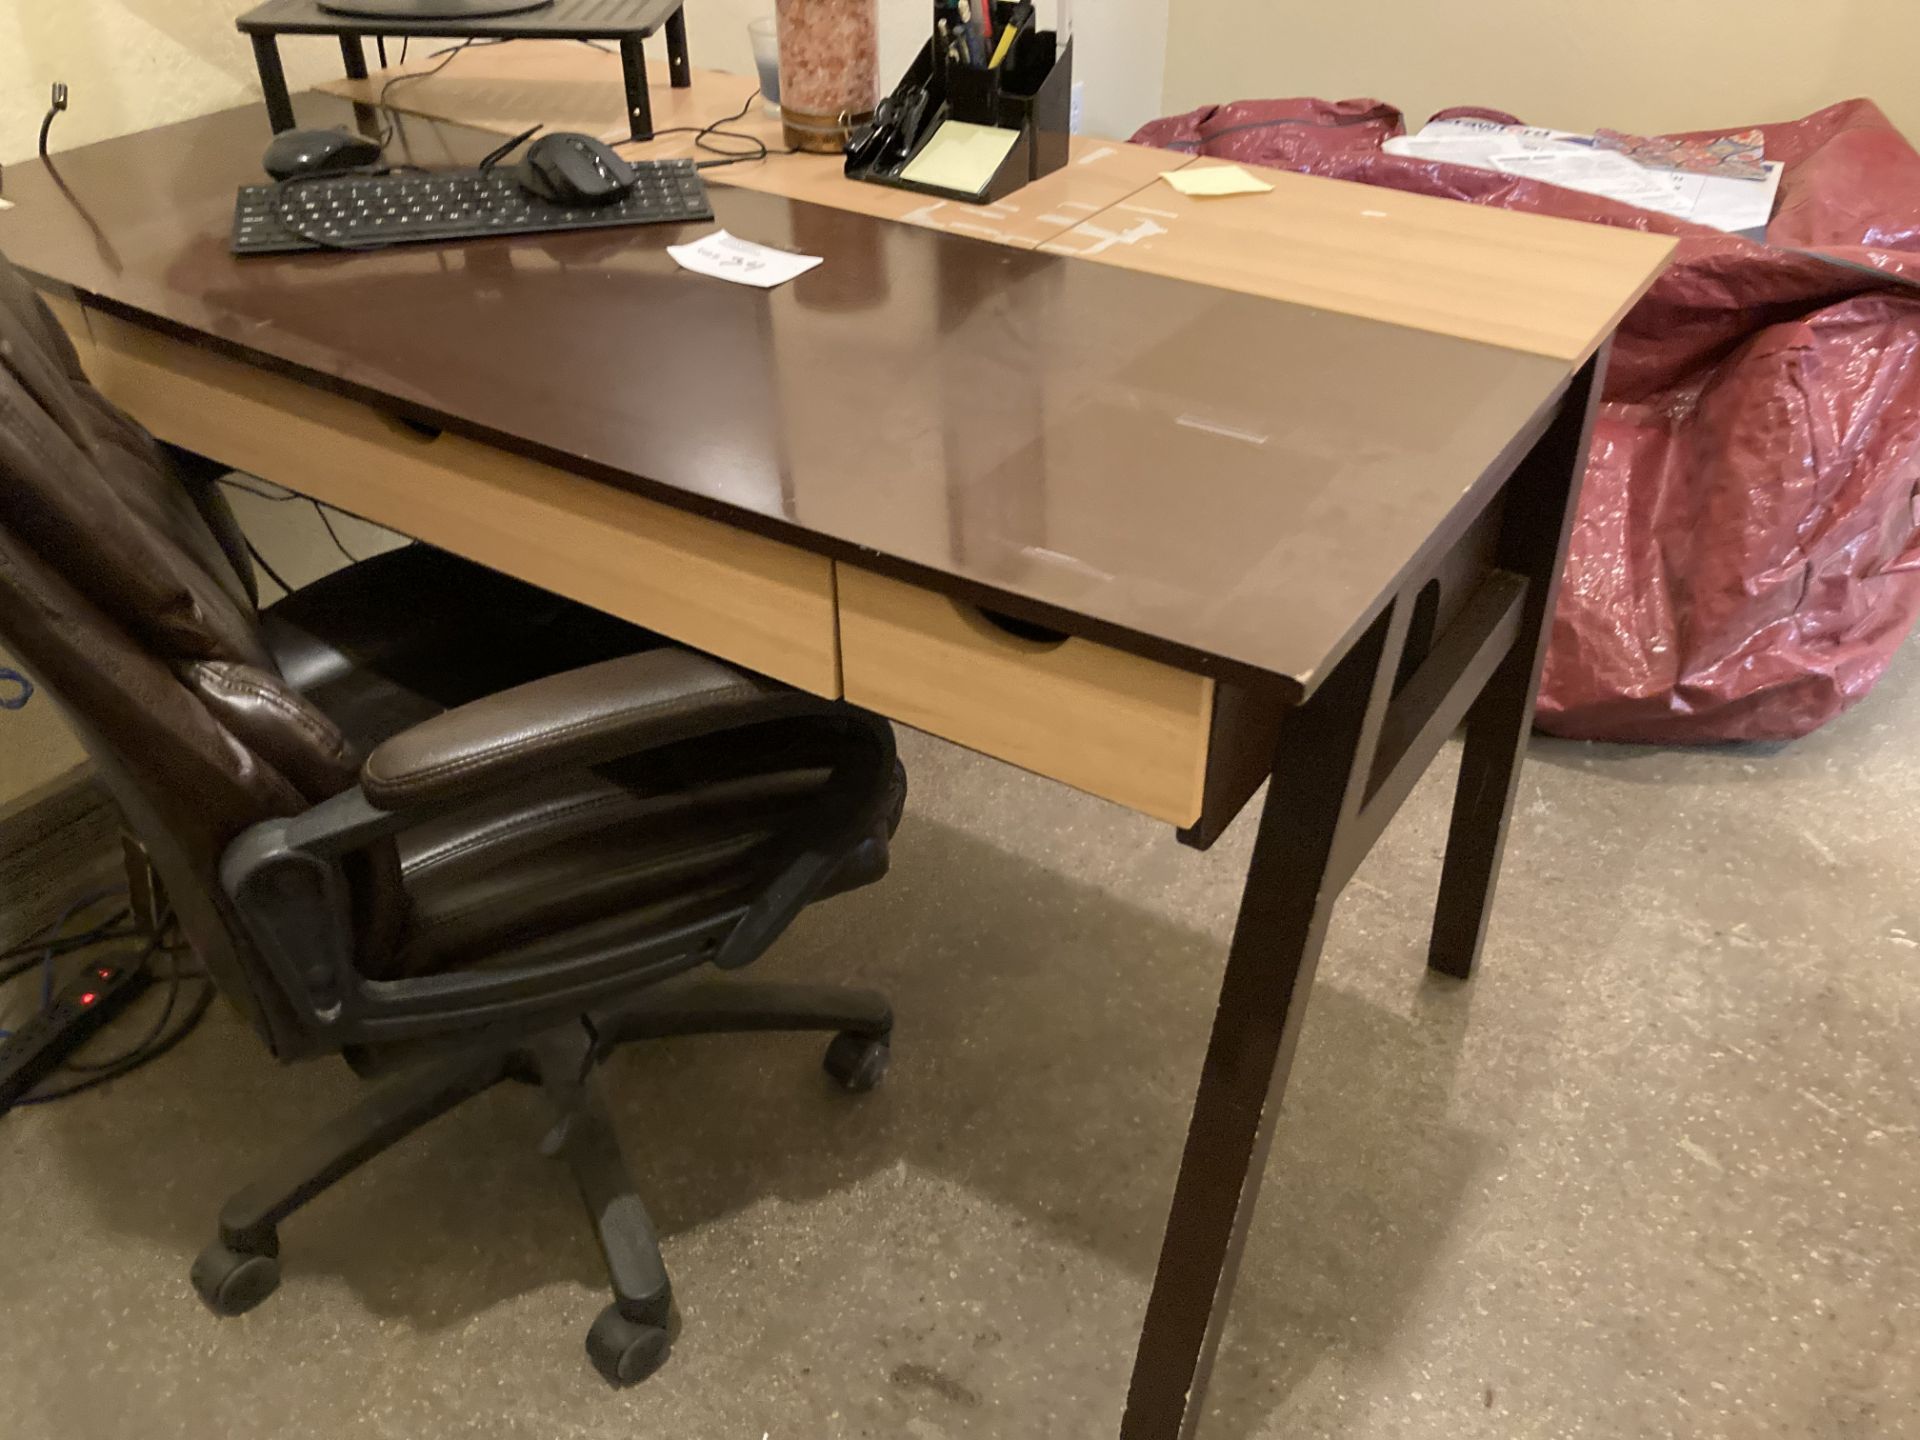 LOT OF: (1) Wood desk, (1) Acer monitor, and (1) chair, with contents - Image 2 of 4